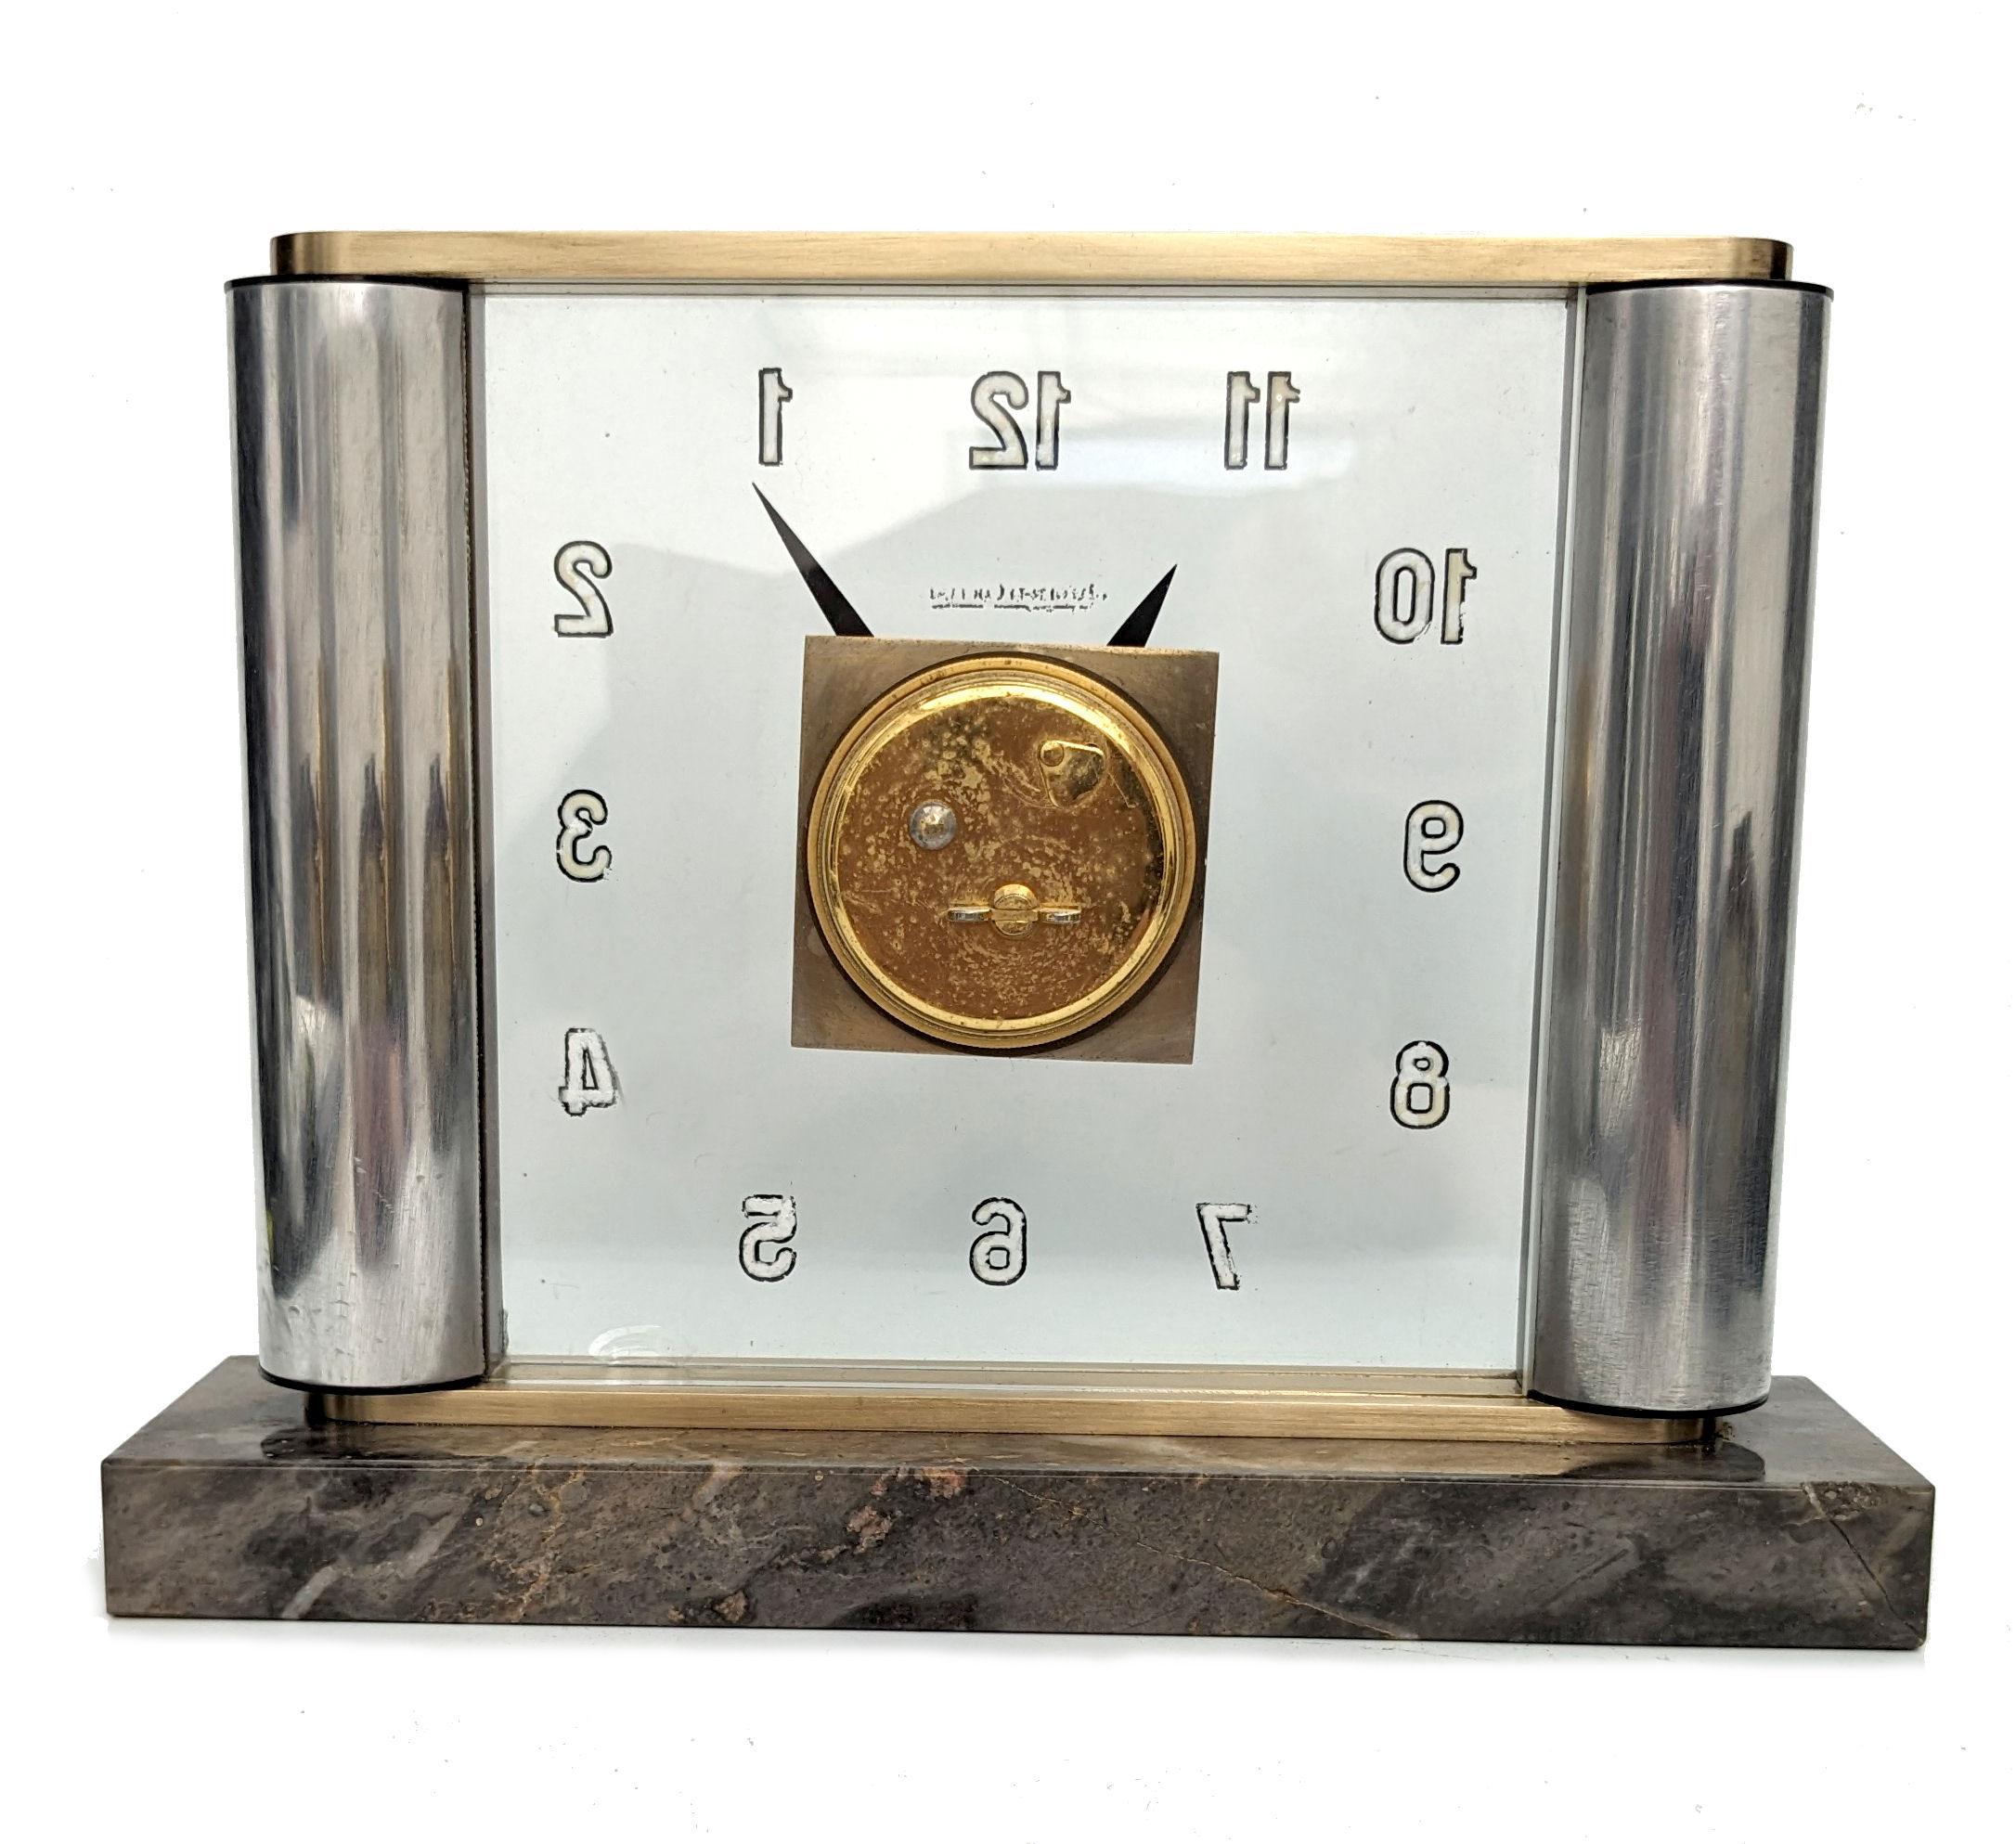 Art Deco Rare Mystery Clock by Jaeger-LeCoultre In Good Condition For Sale In Devon, England